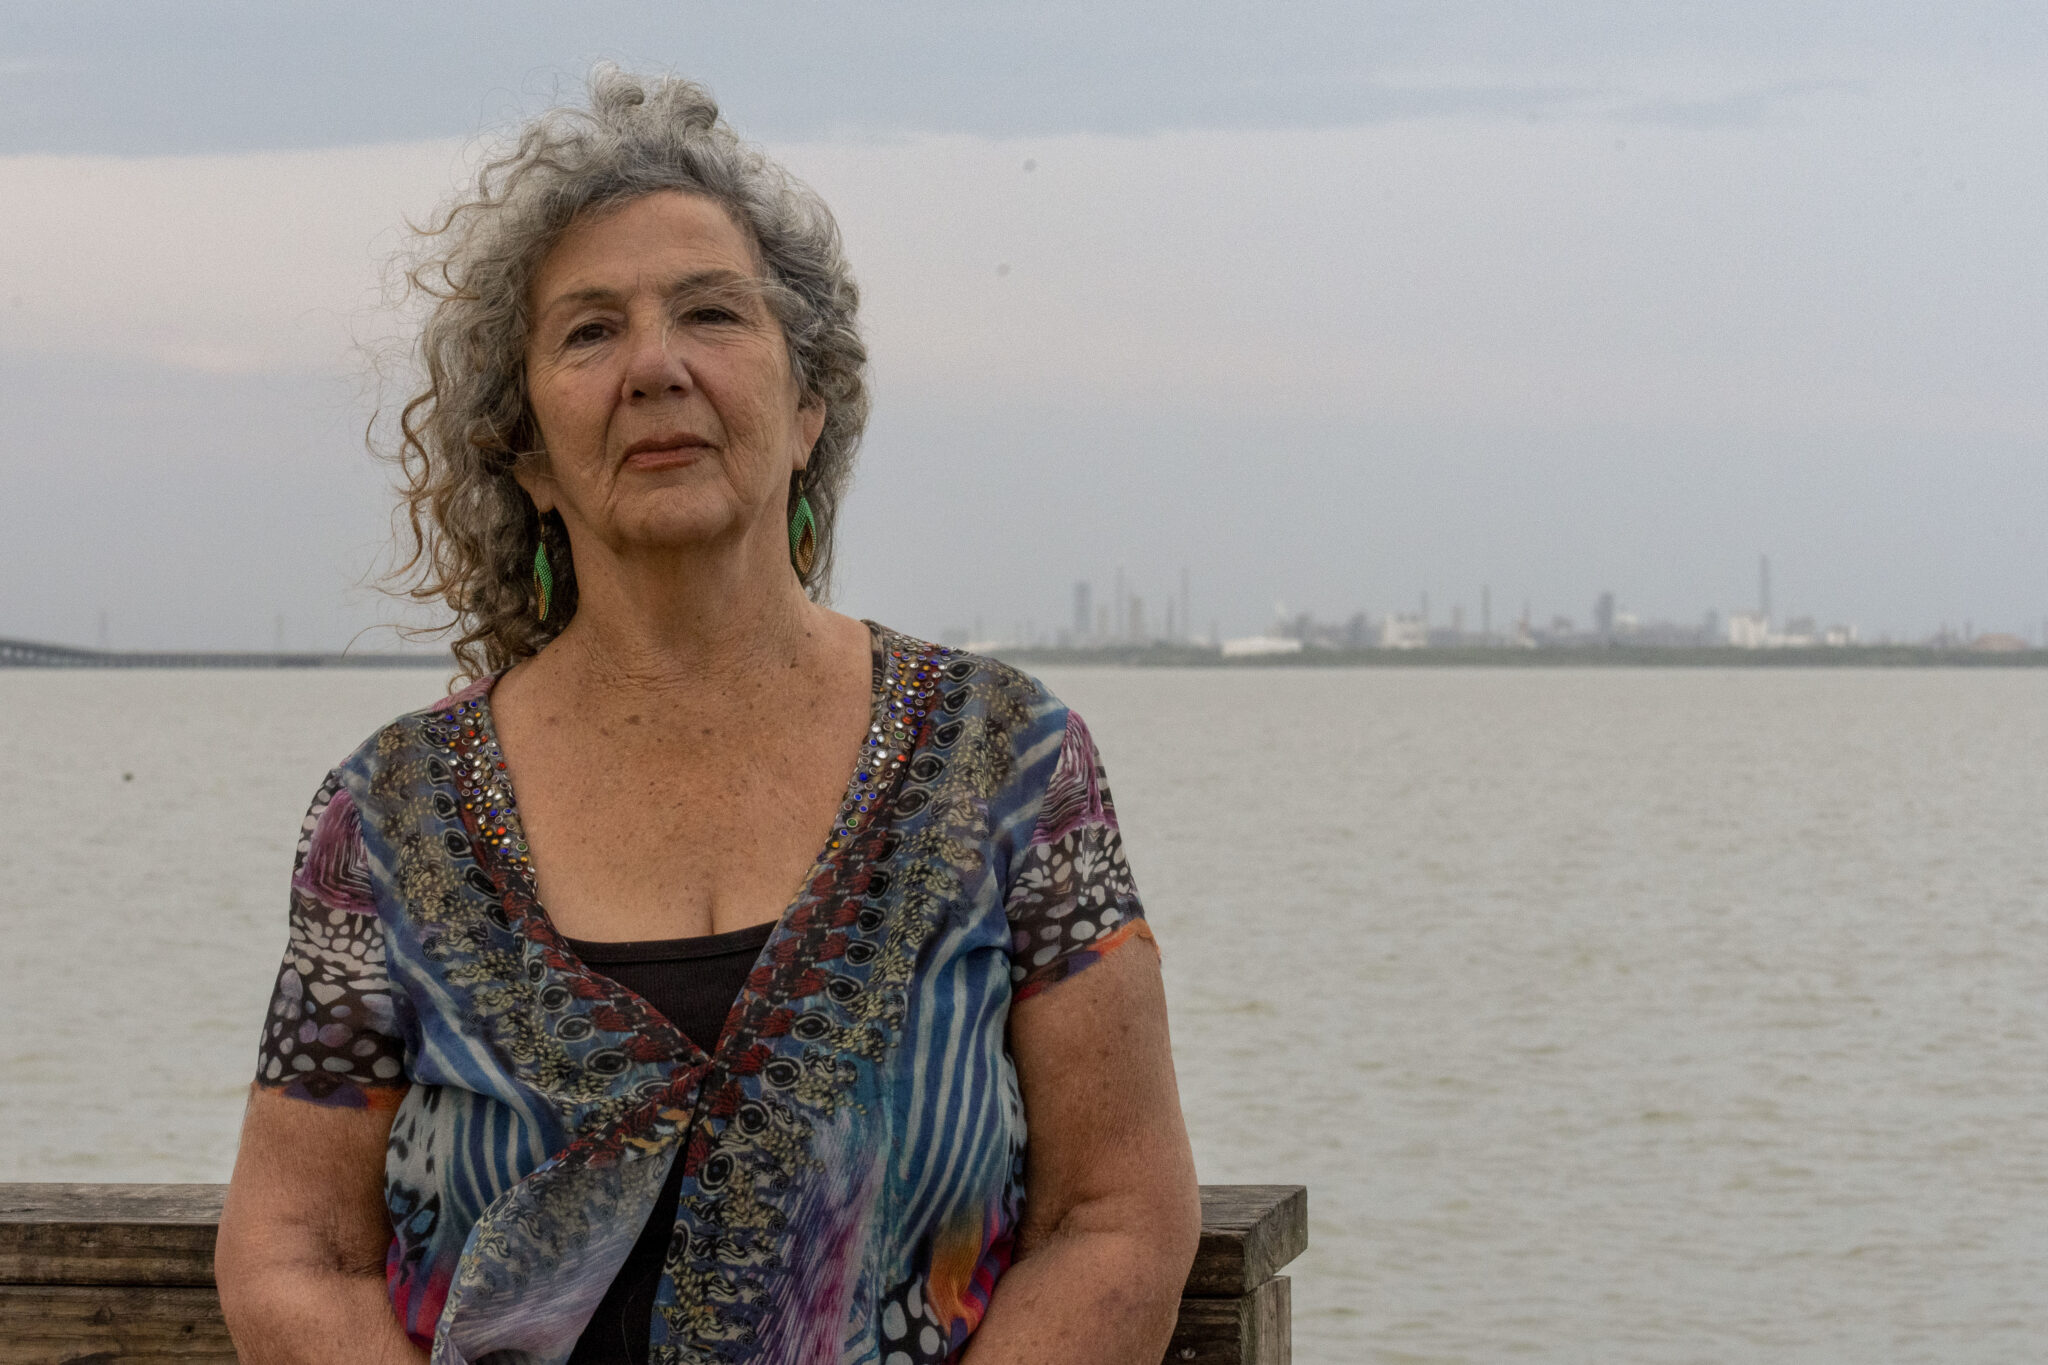 A woman with curly gray hair and a blue blouse stands in front of a bay.